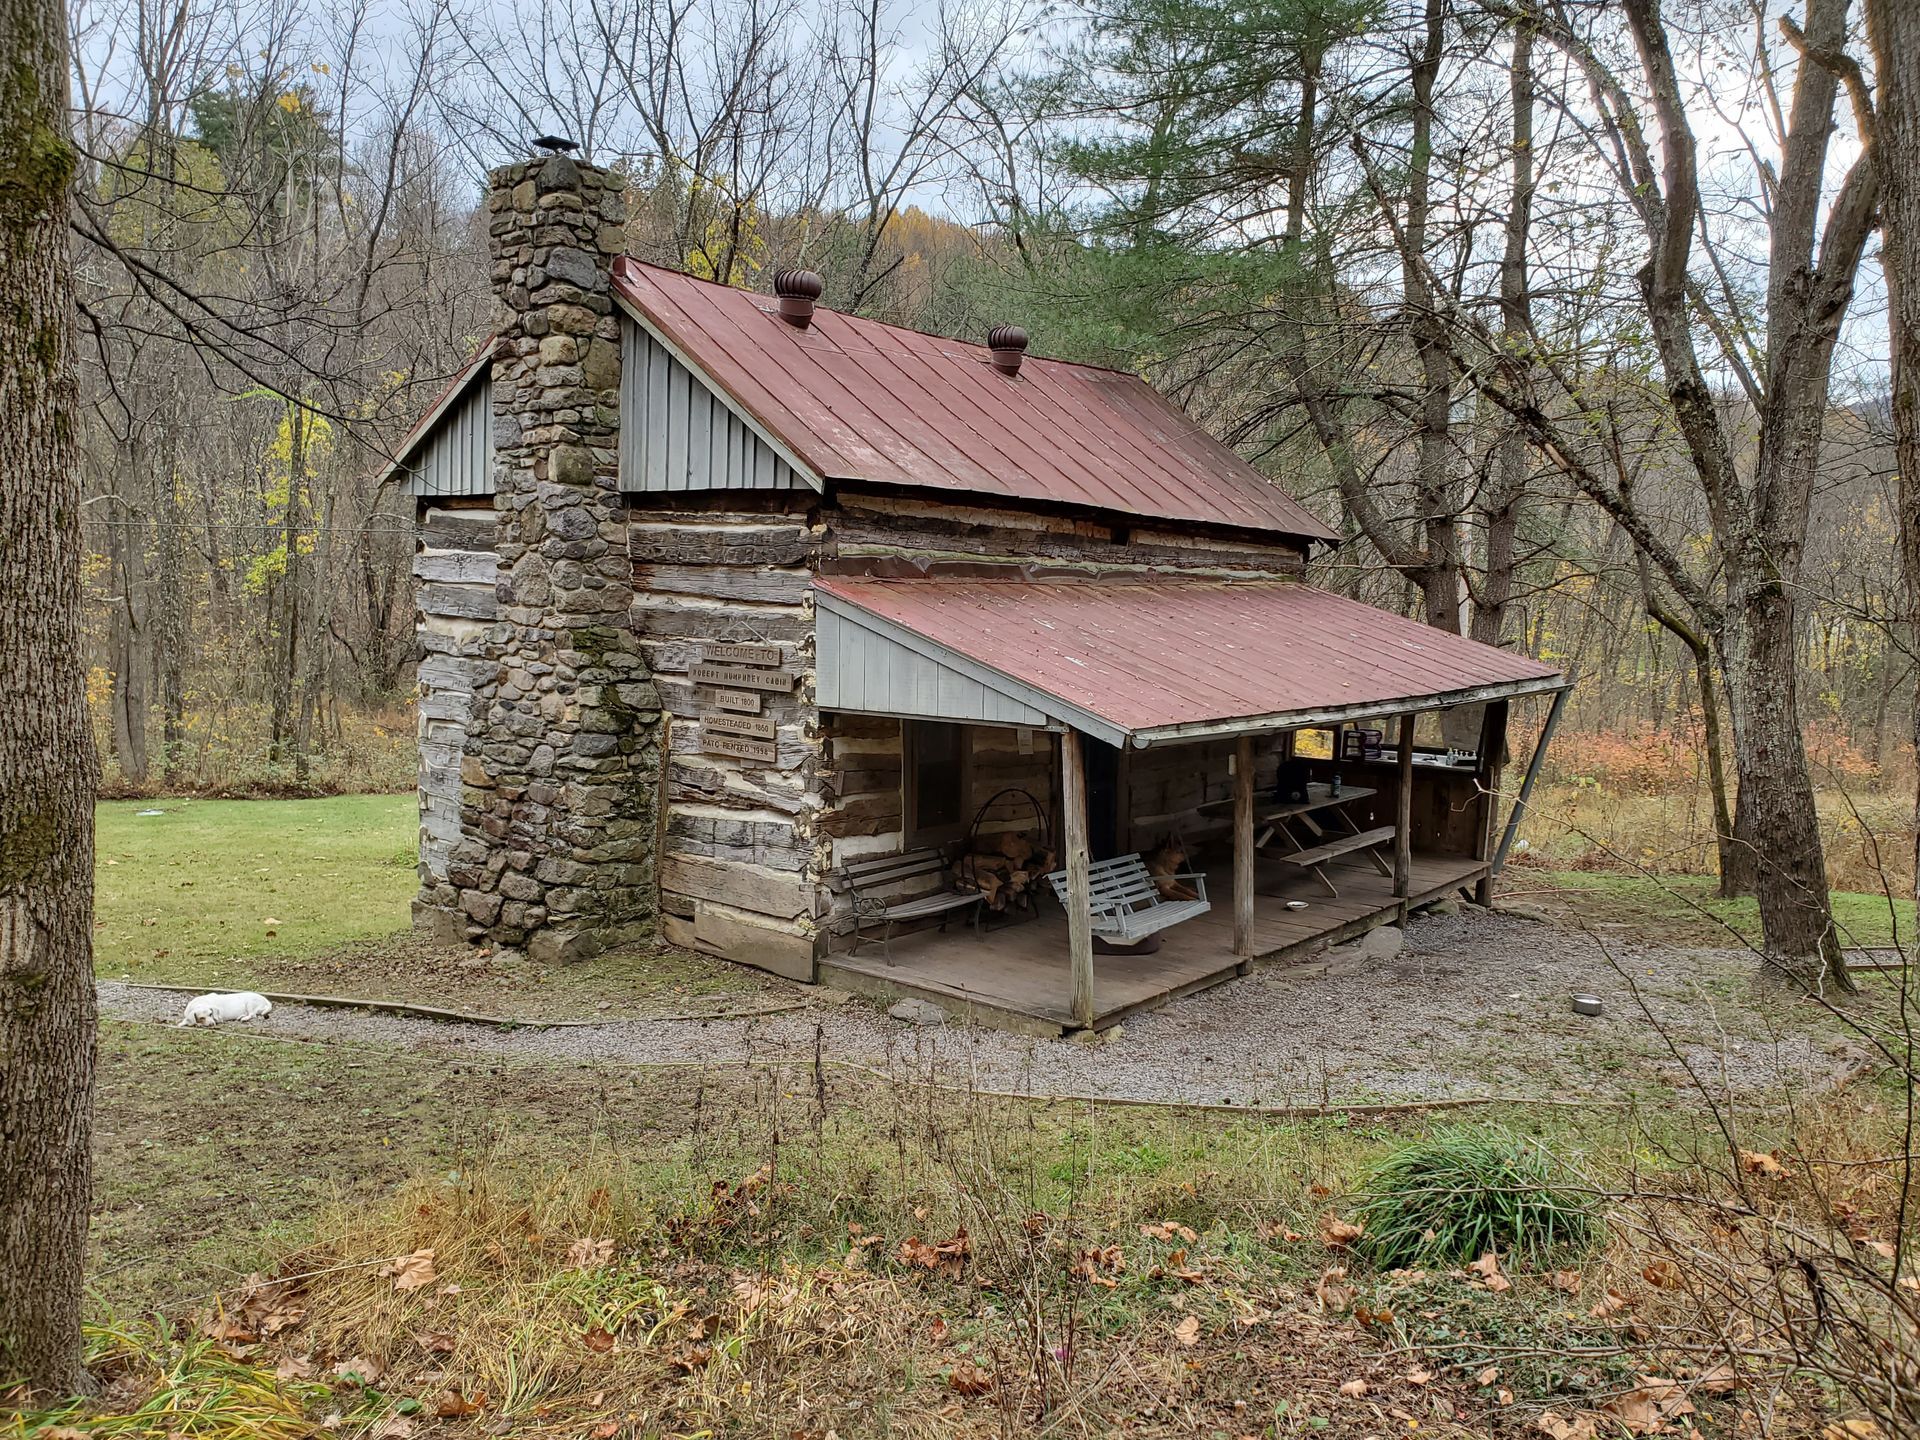 A wooden and stone PATC cabin, with a red metal roof.